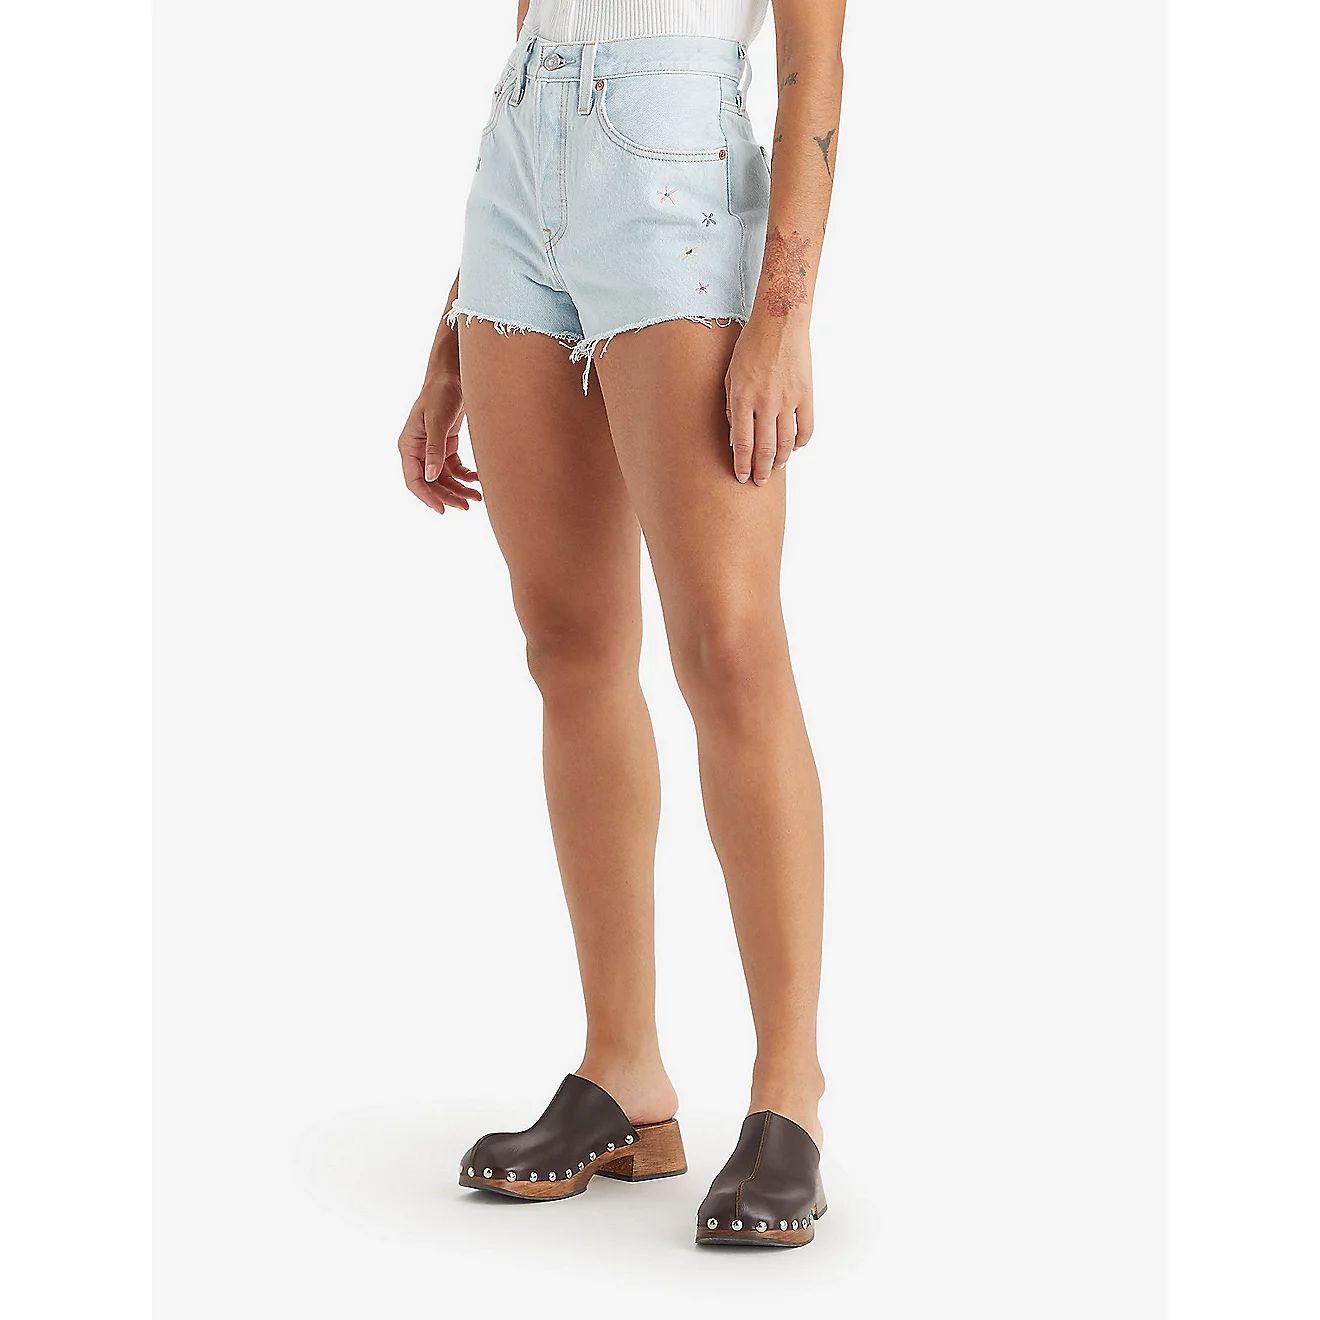 Levi's Women's 501 Original High Rise Shorts 2.5 in | Academy | Academy Sports + Outdoors